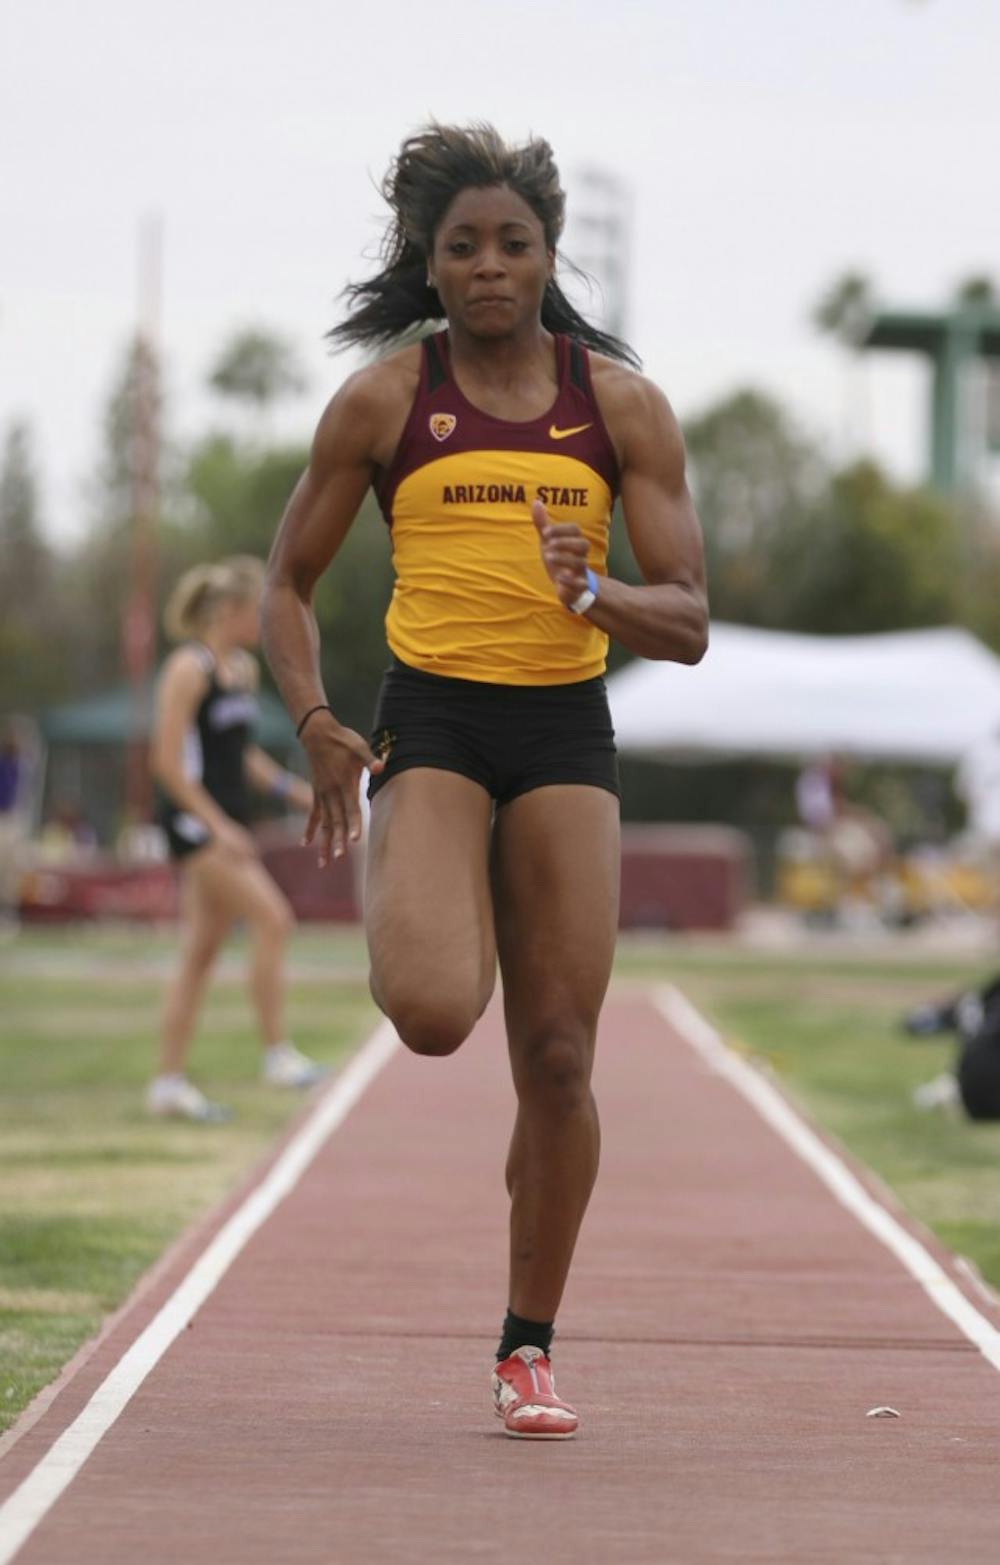 Junior Alycia Herring competing in the long jump at the 2012 Baldy Castillo Invitational on March 17, 2012. (Photo by Sam Rosenbaum)